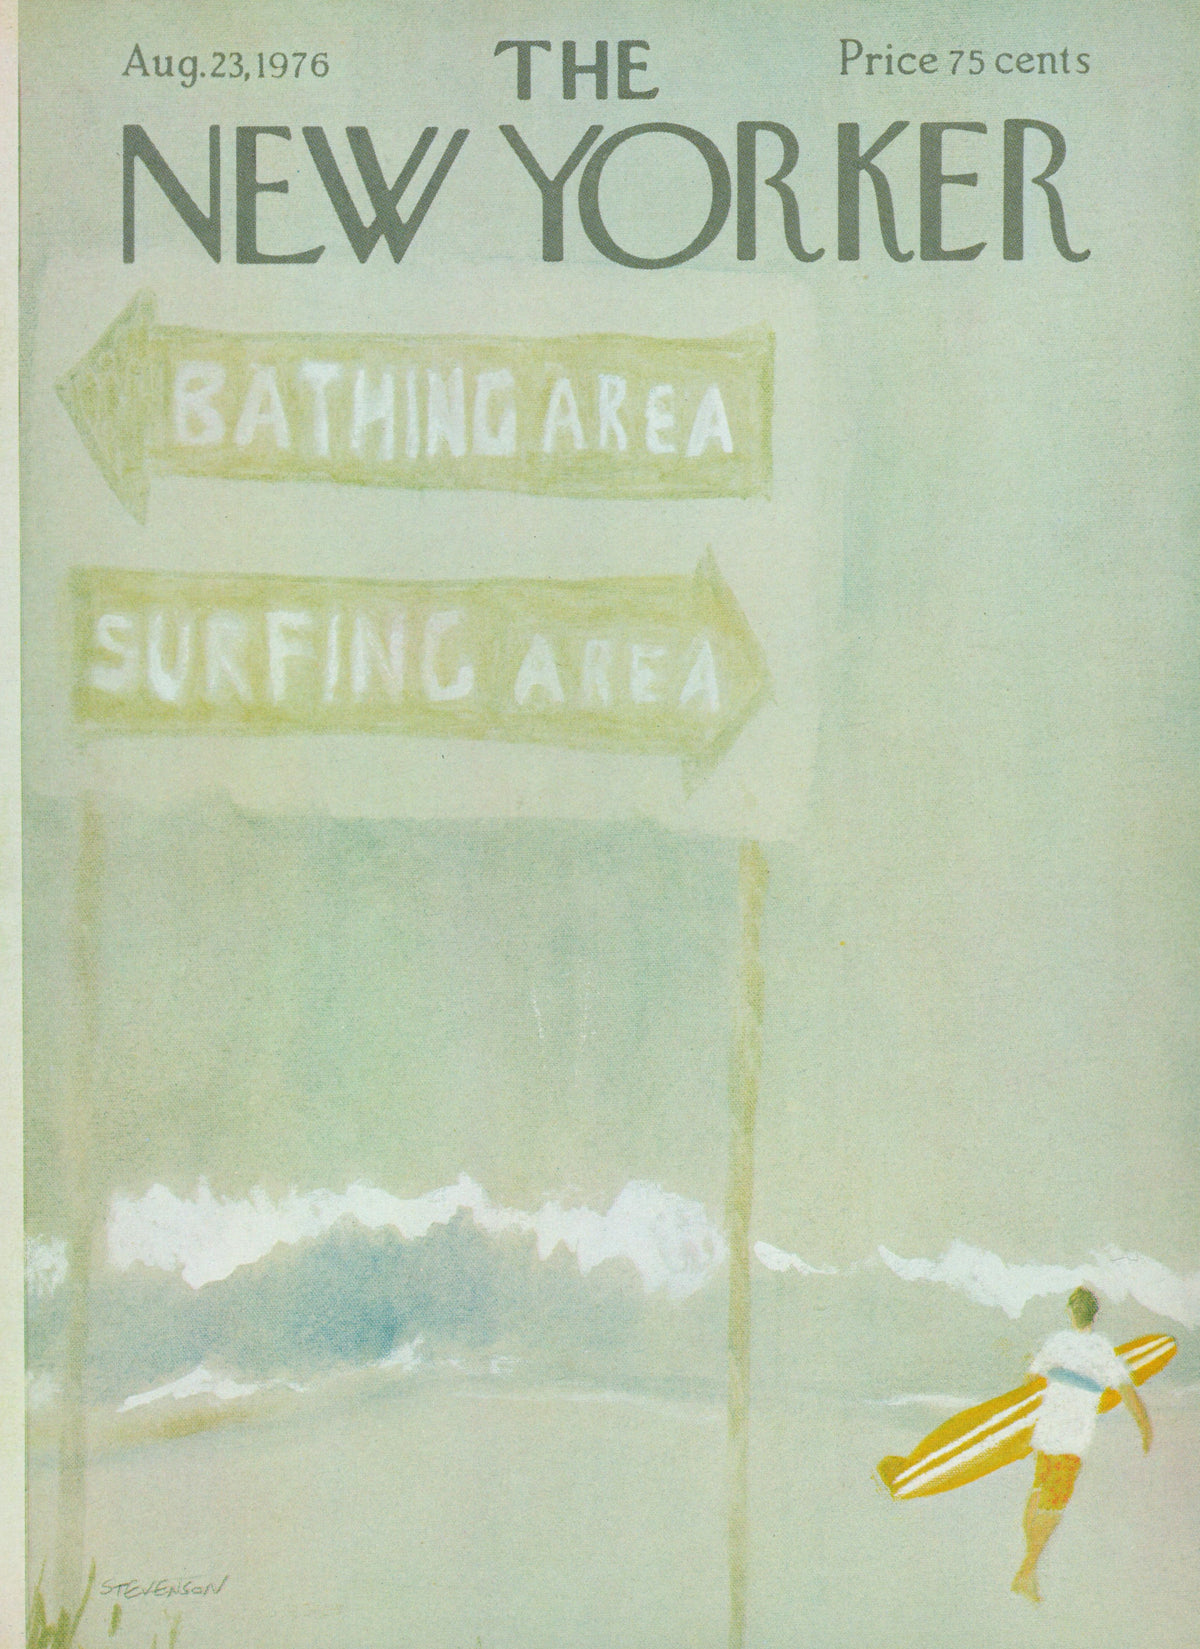 Gone Surfing- The New Yorker - Authentic Vintage Antique Print